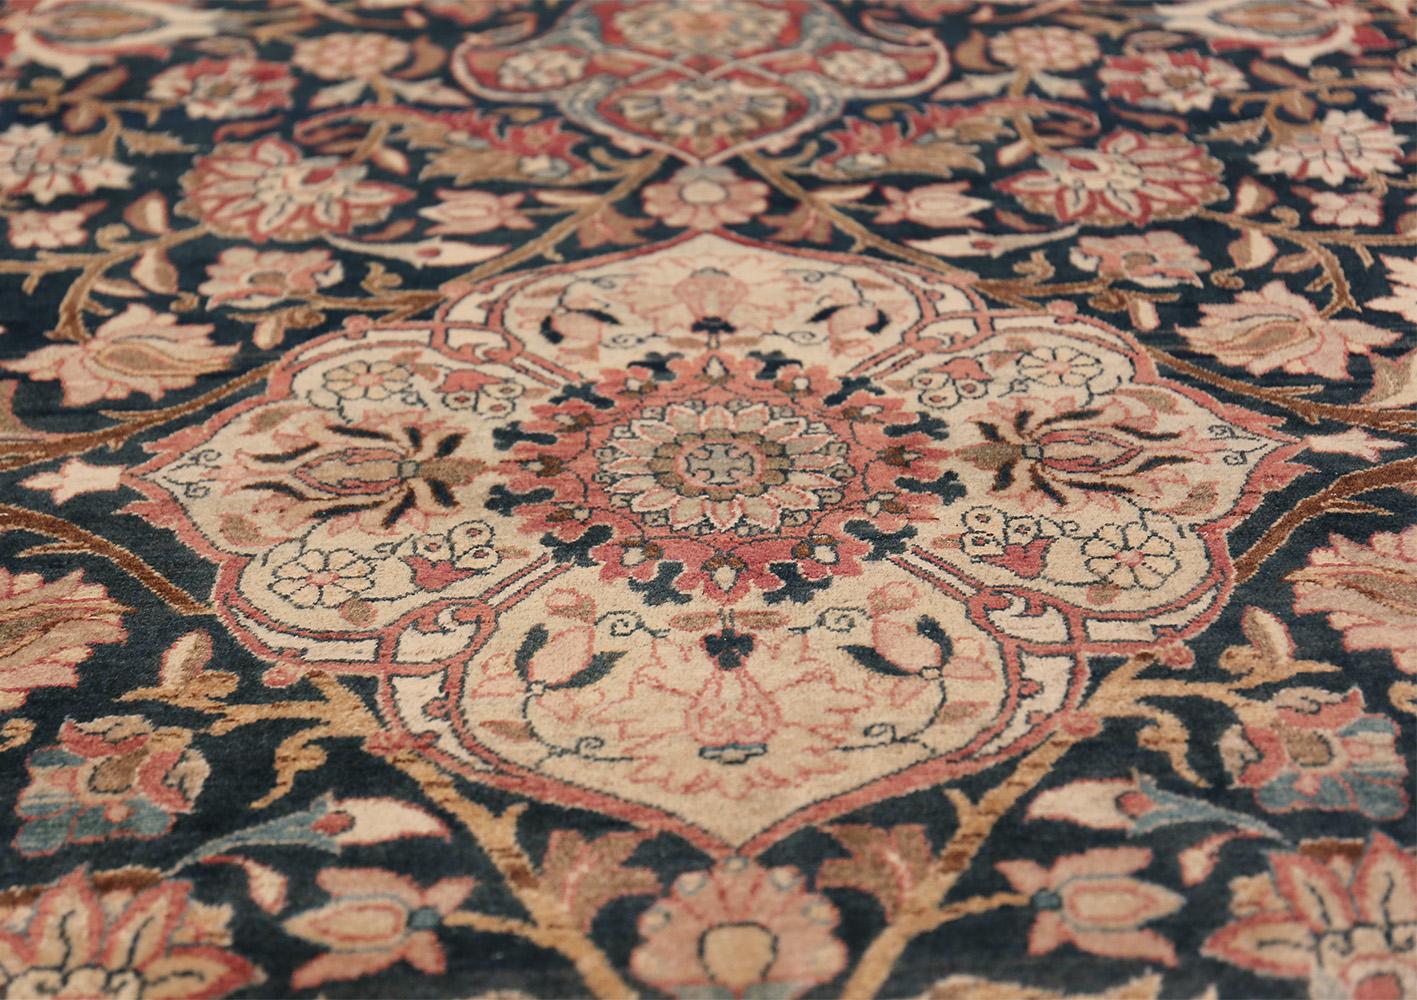 Oversized Antique Tehran Persian Carpet. Size: 14 ft 3 in x 22 ft 3 in 5